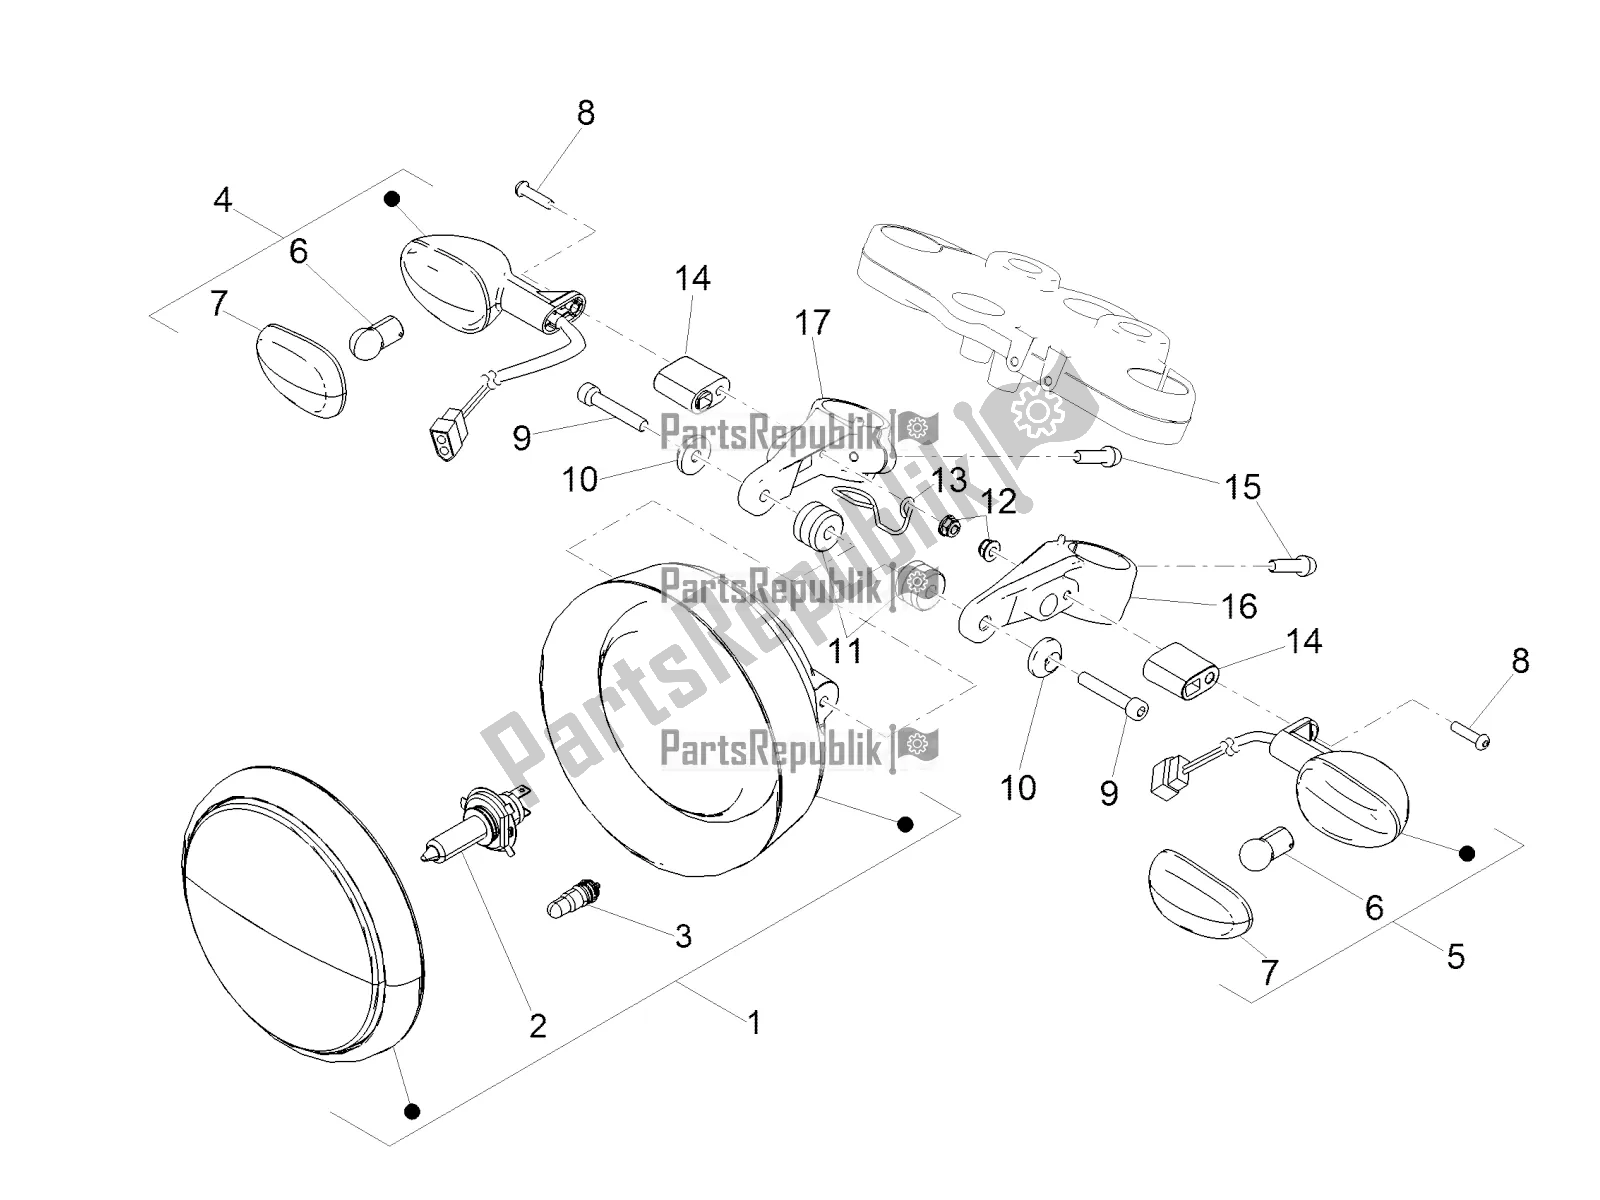 All parts for the Front Lights of the Moto-Guzzi V7 III Rough 750 ABS 2019